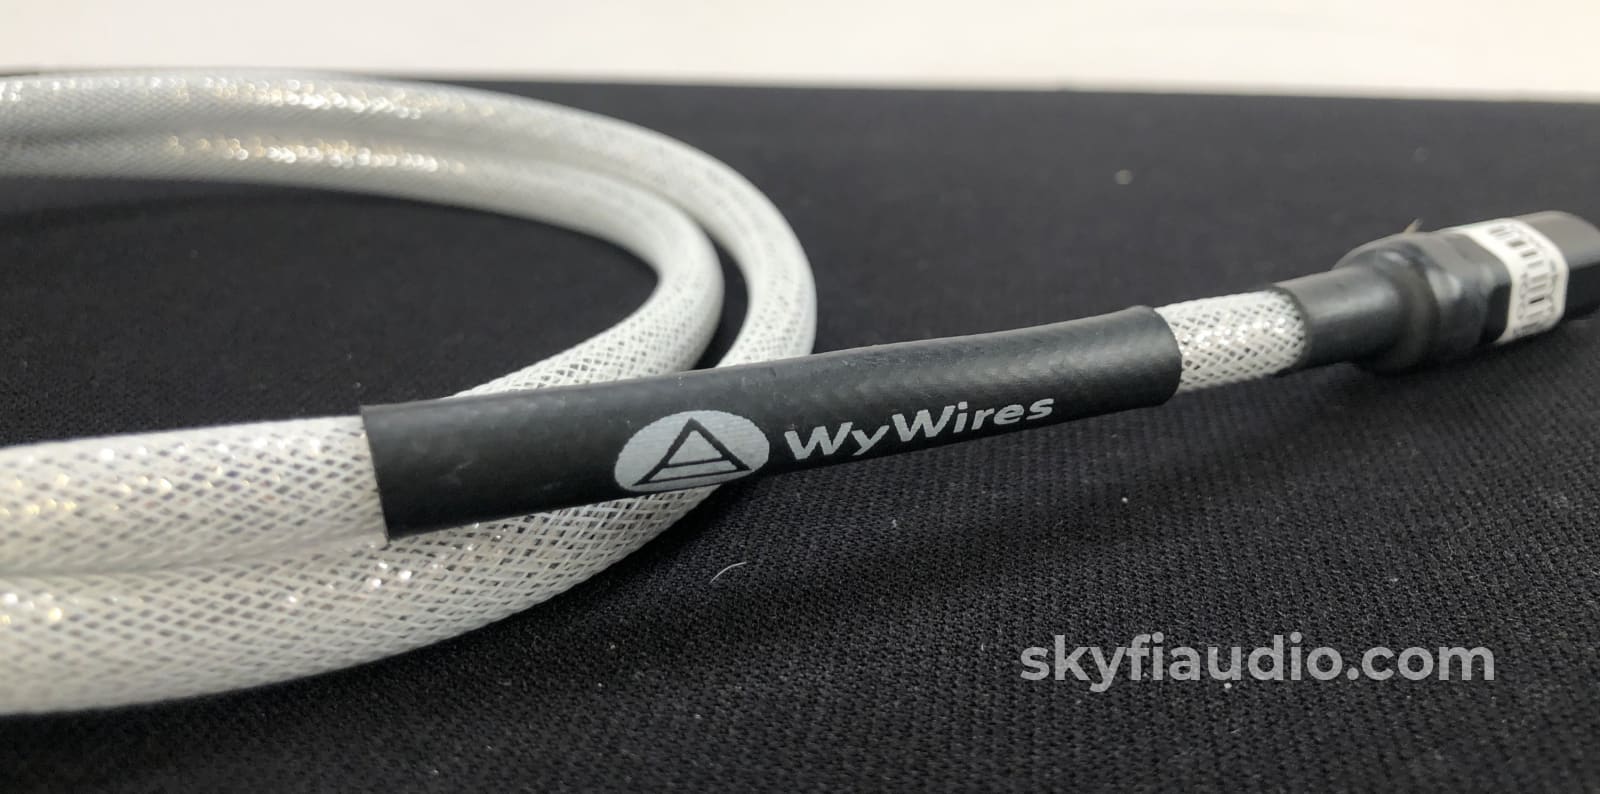 Wywires Litespd Coaxial Digital Cable - Silver W/Furutech Connectors 4 Cables